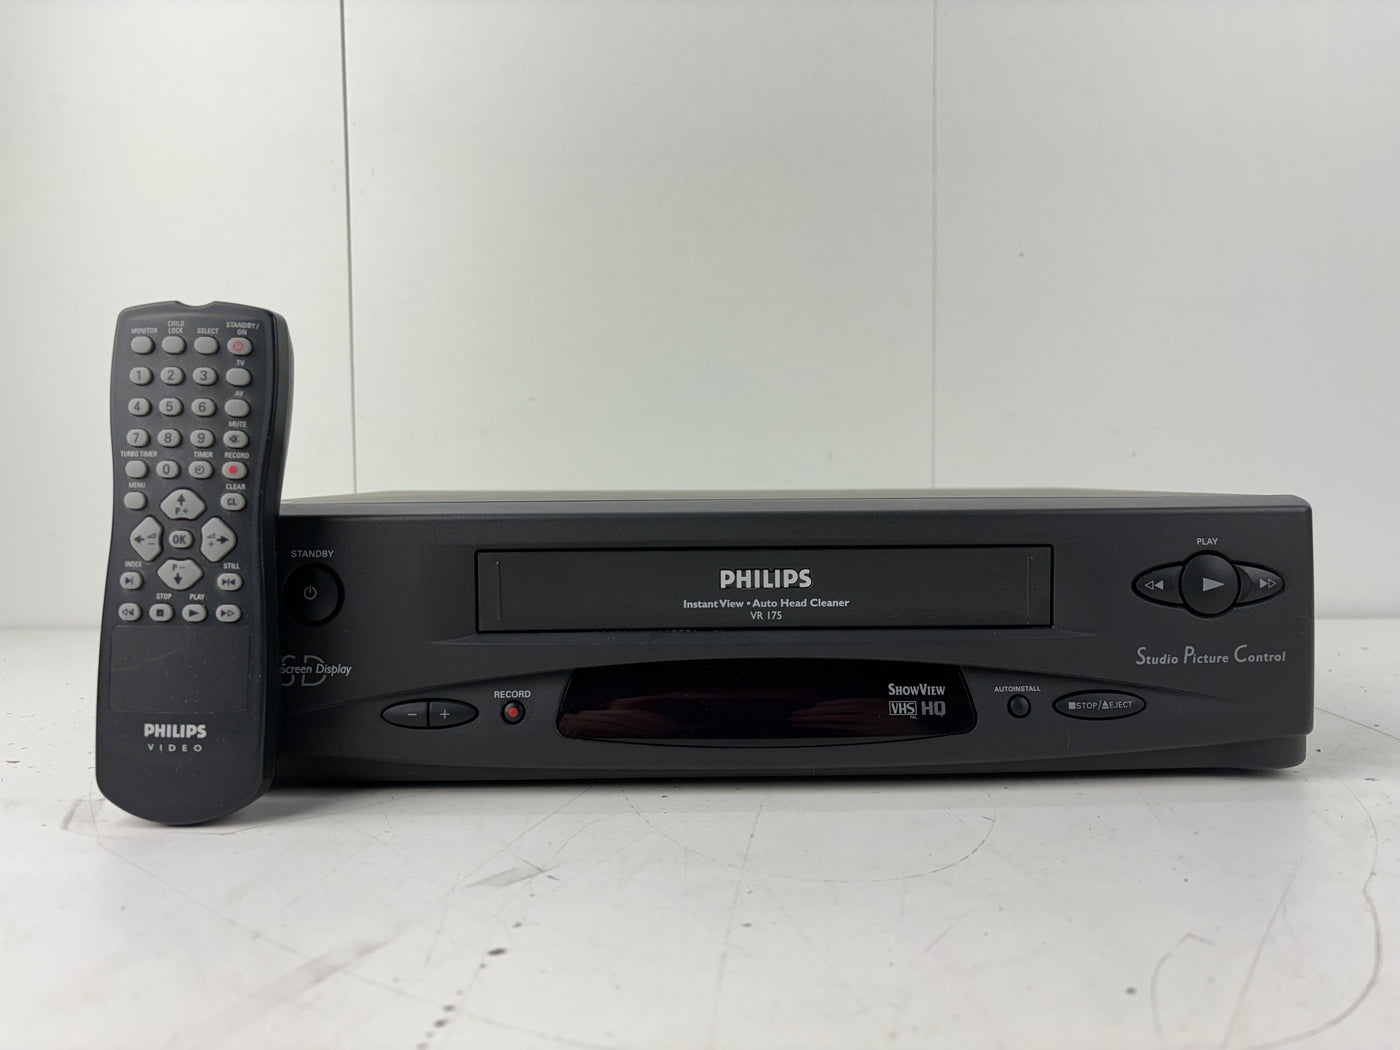 Philips VR175 VHS Videorecorder - With remote